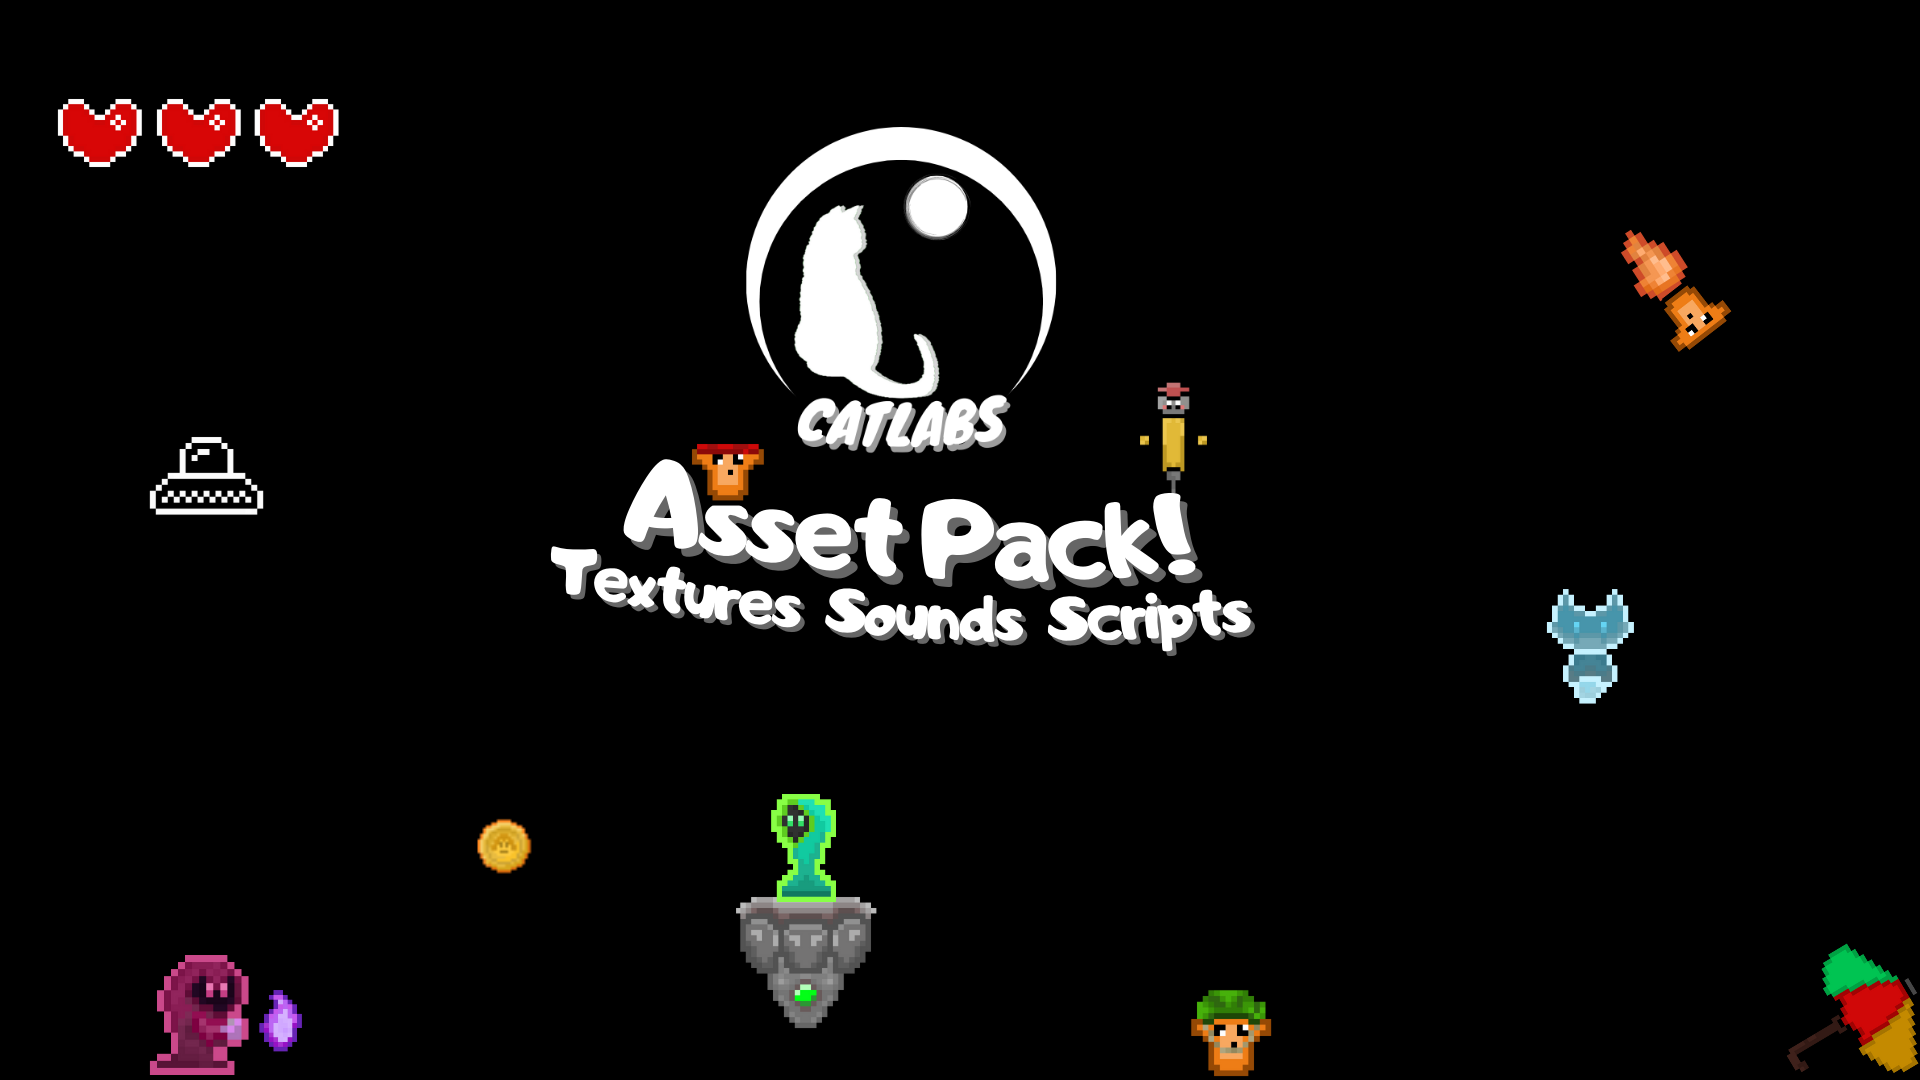 Cat Labs Asset pack